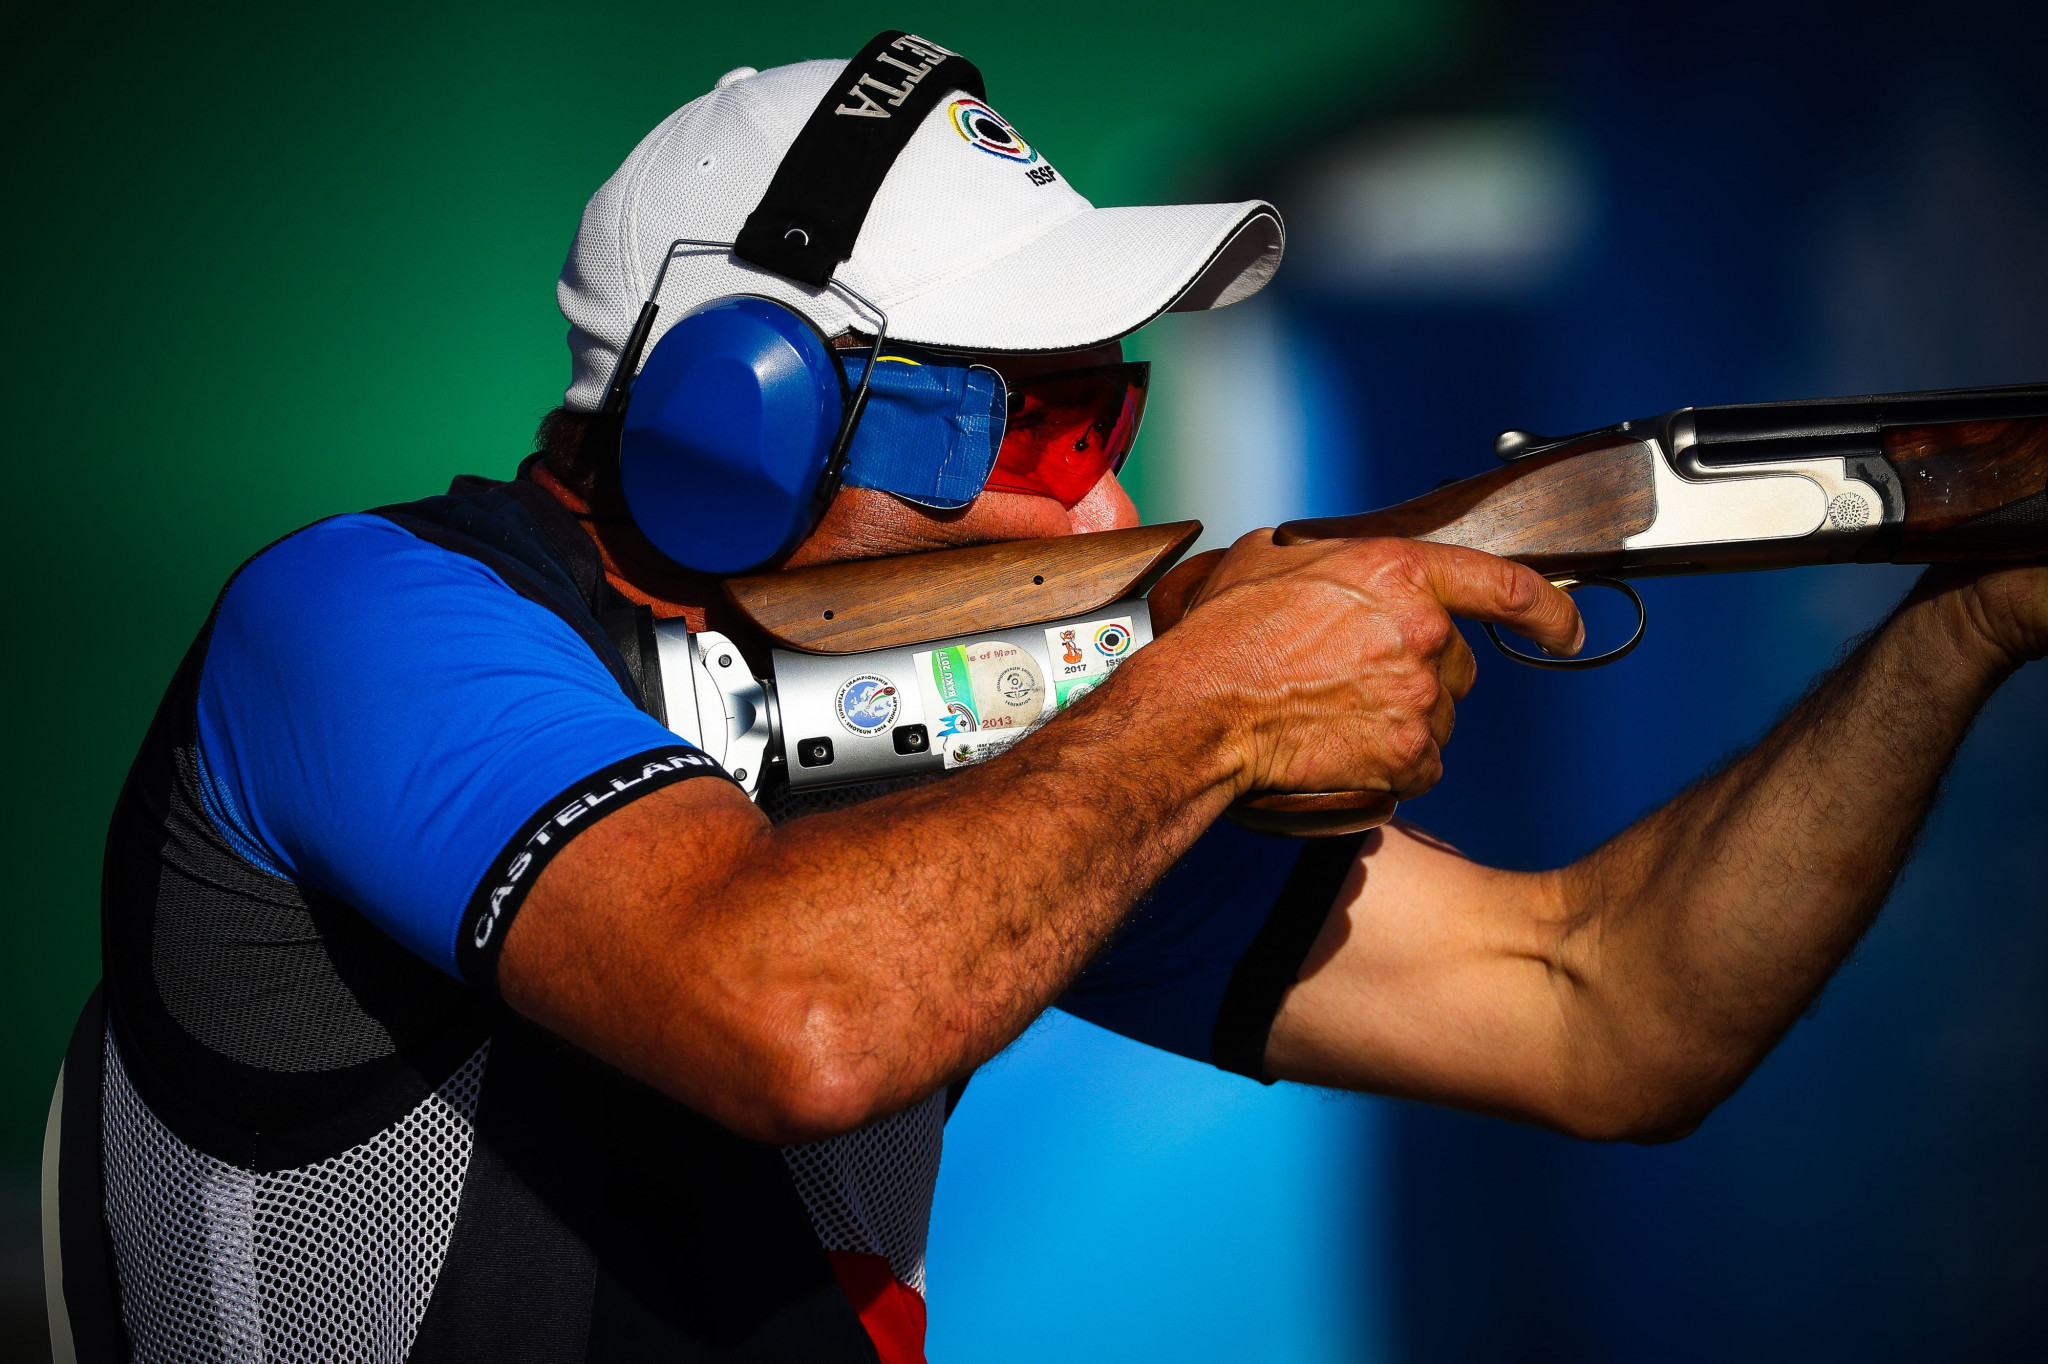 Shooting was not included as part of the Birmingham 2022 sports programme ©Getty Images